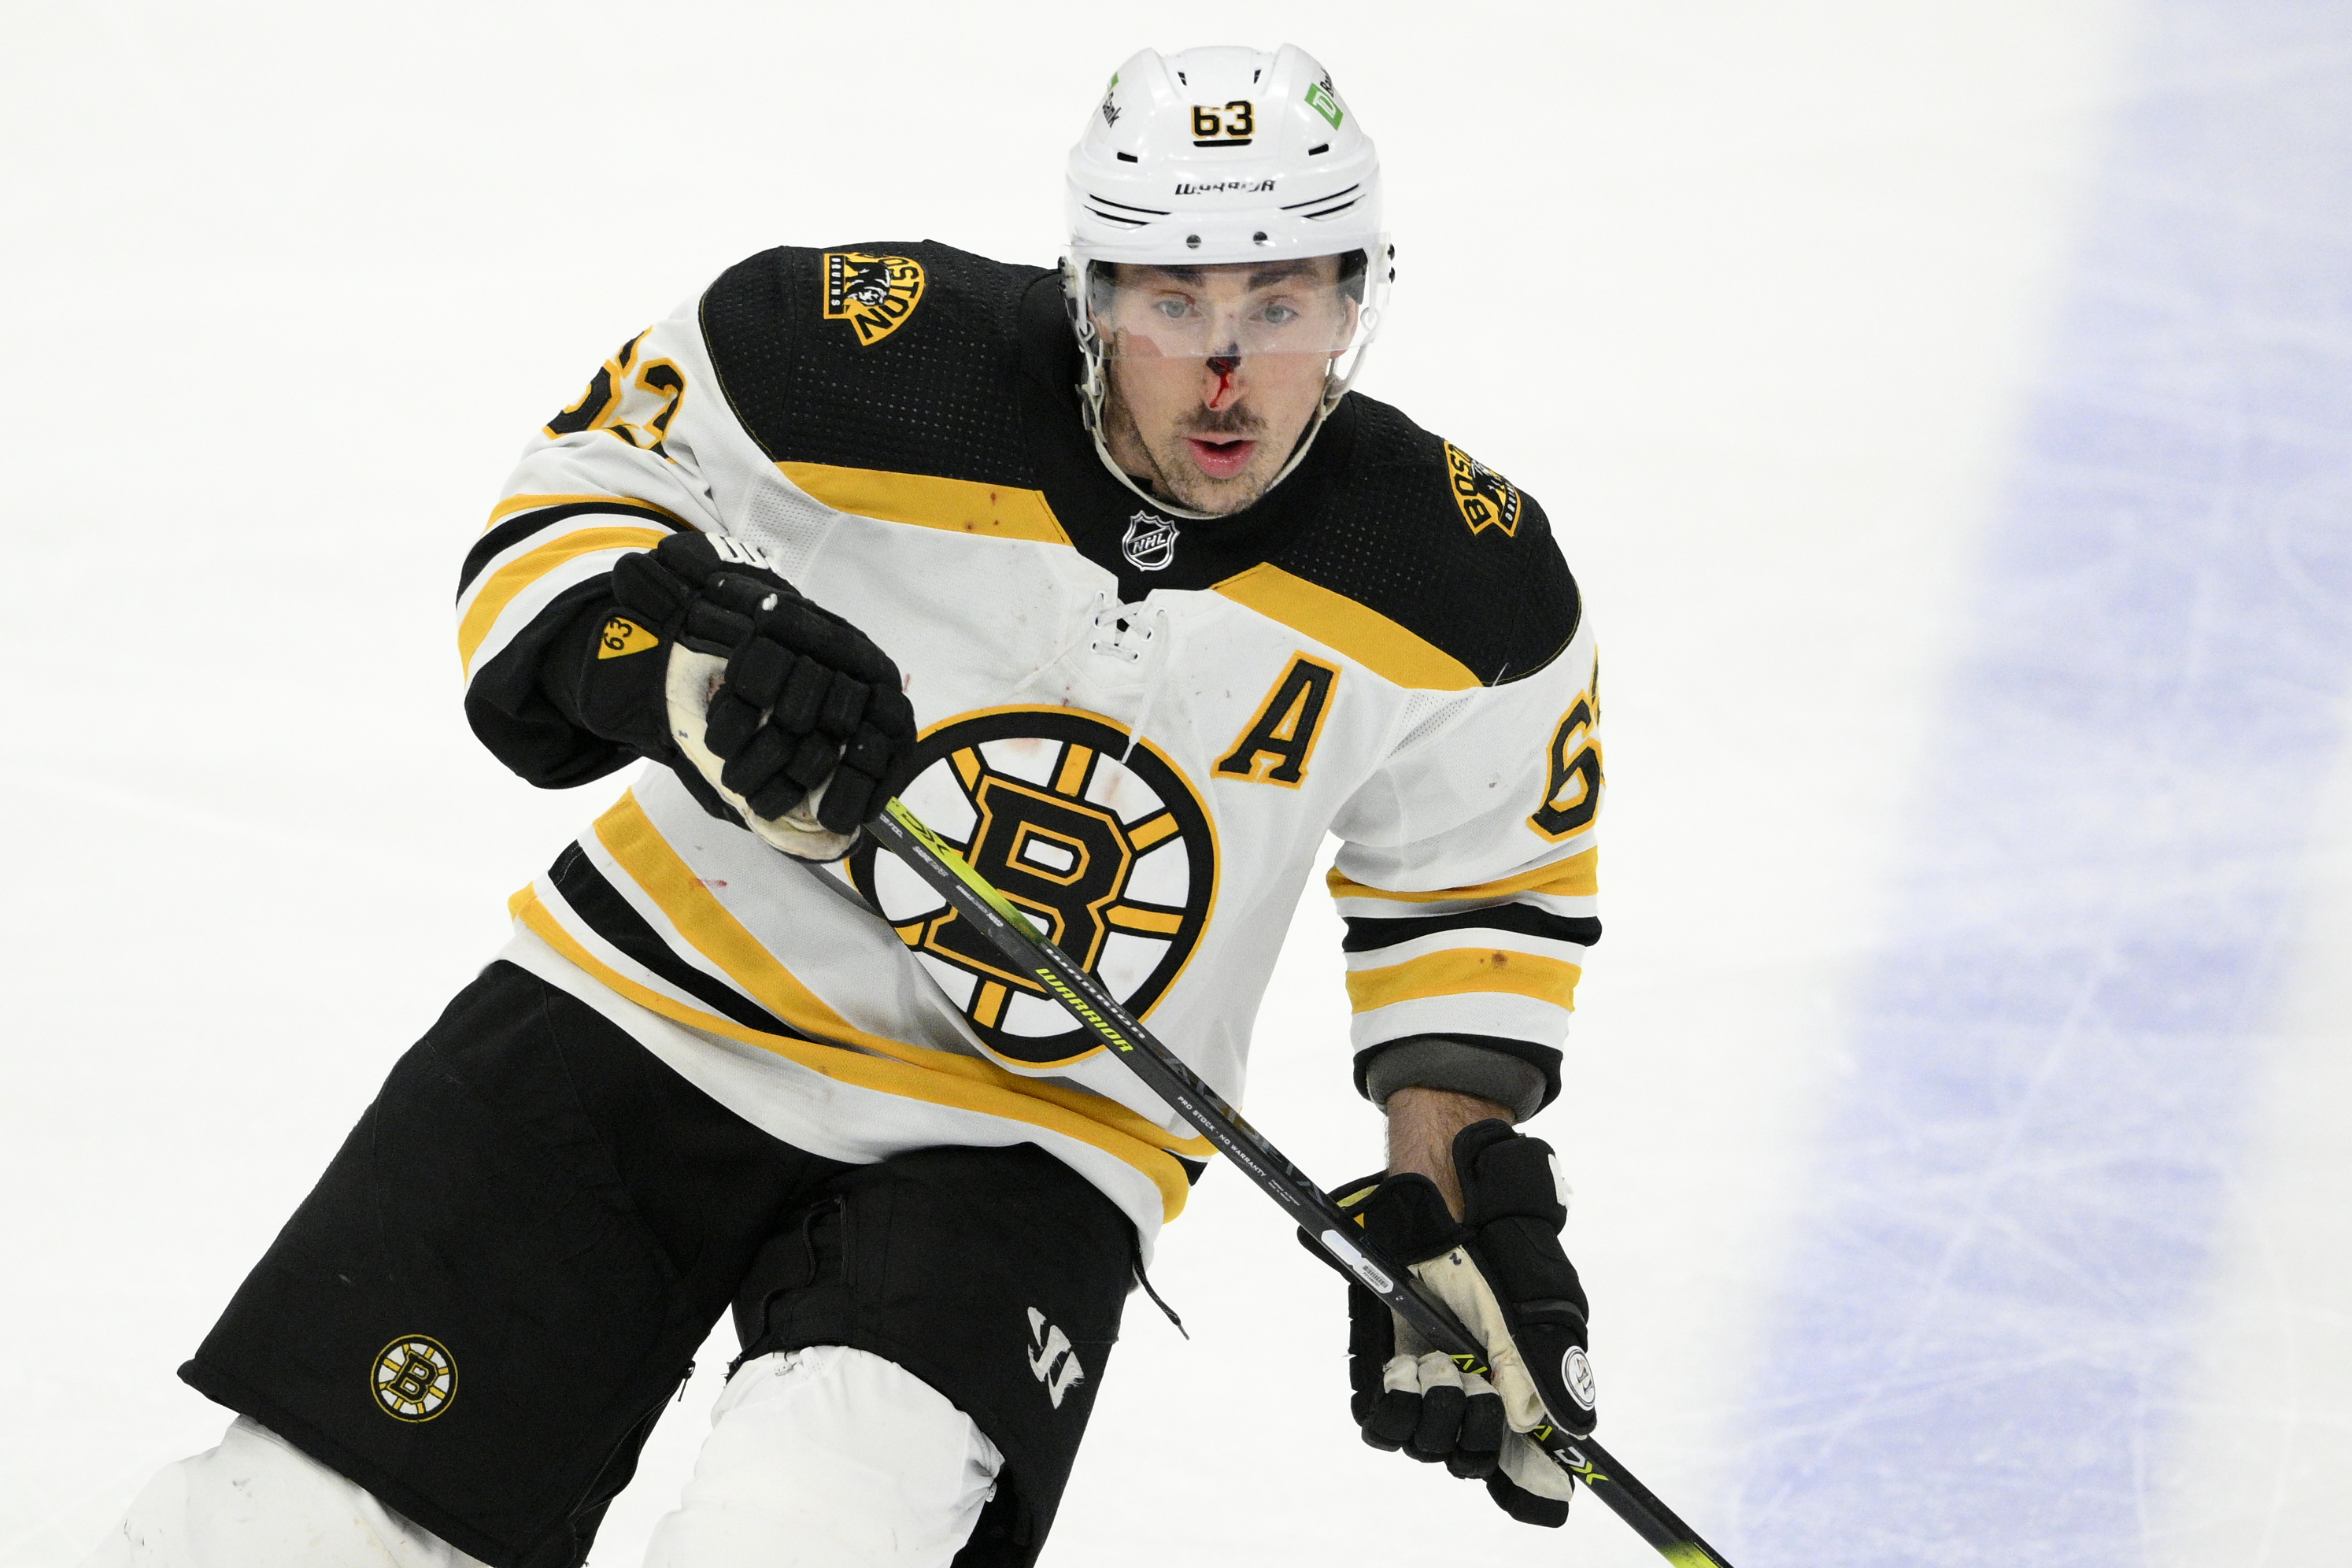 NHL referee takes out Bruins' Brad Marchand with surprise check in